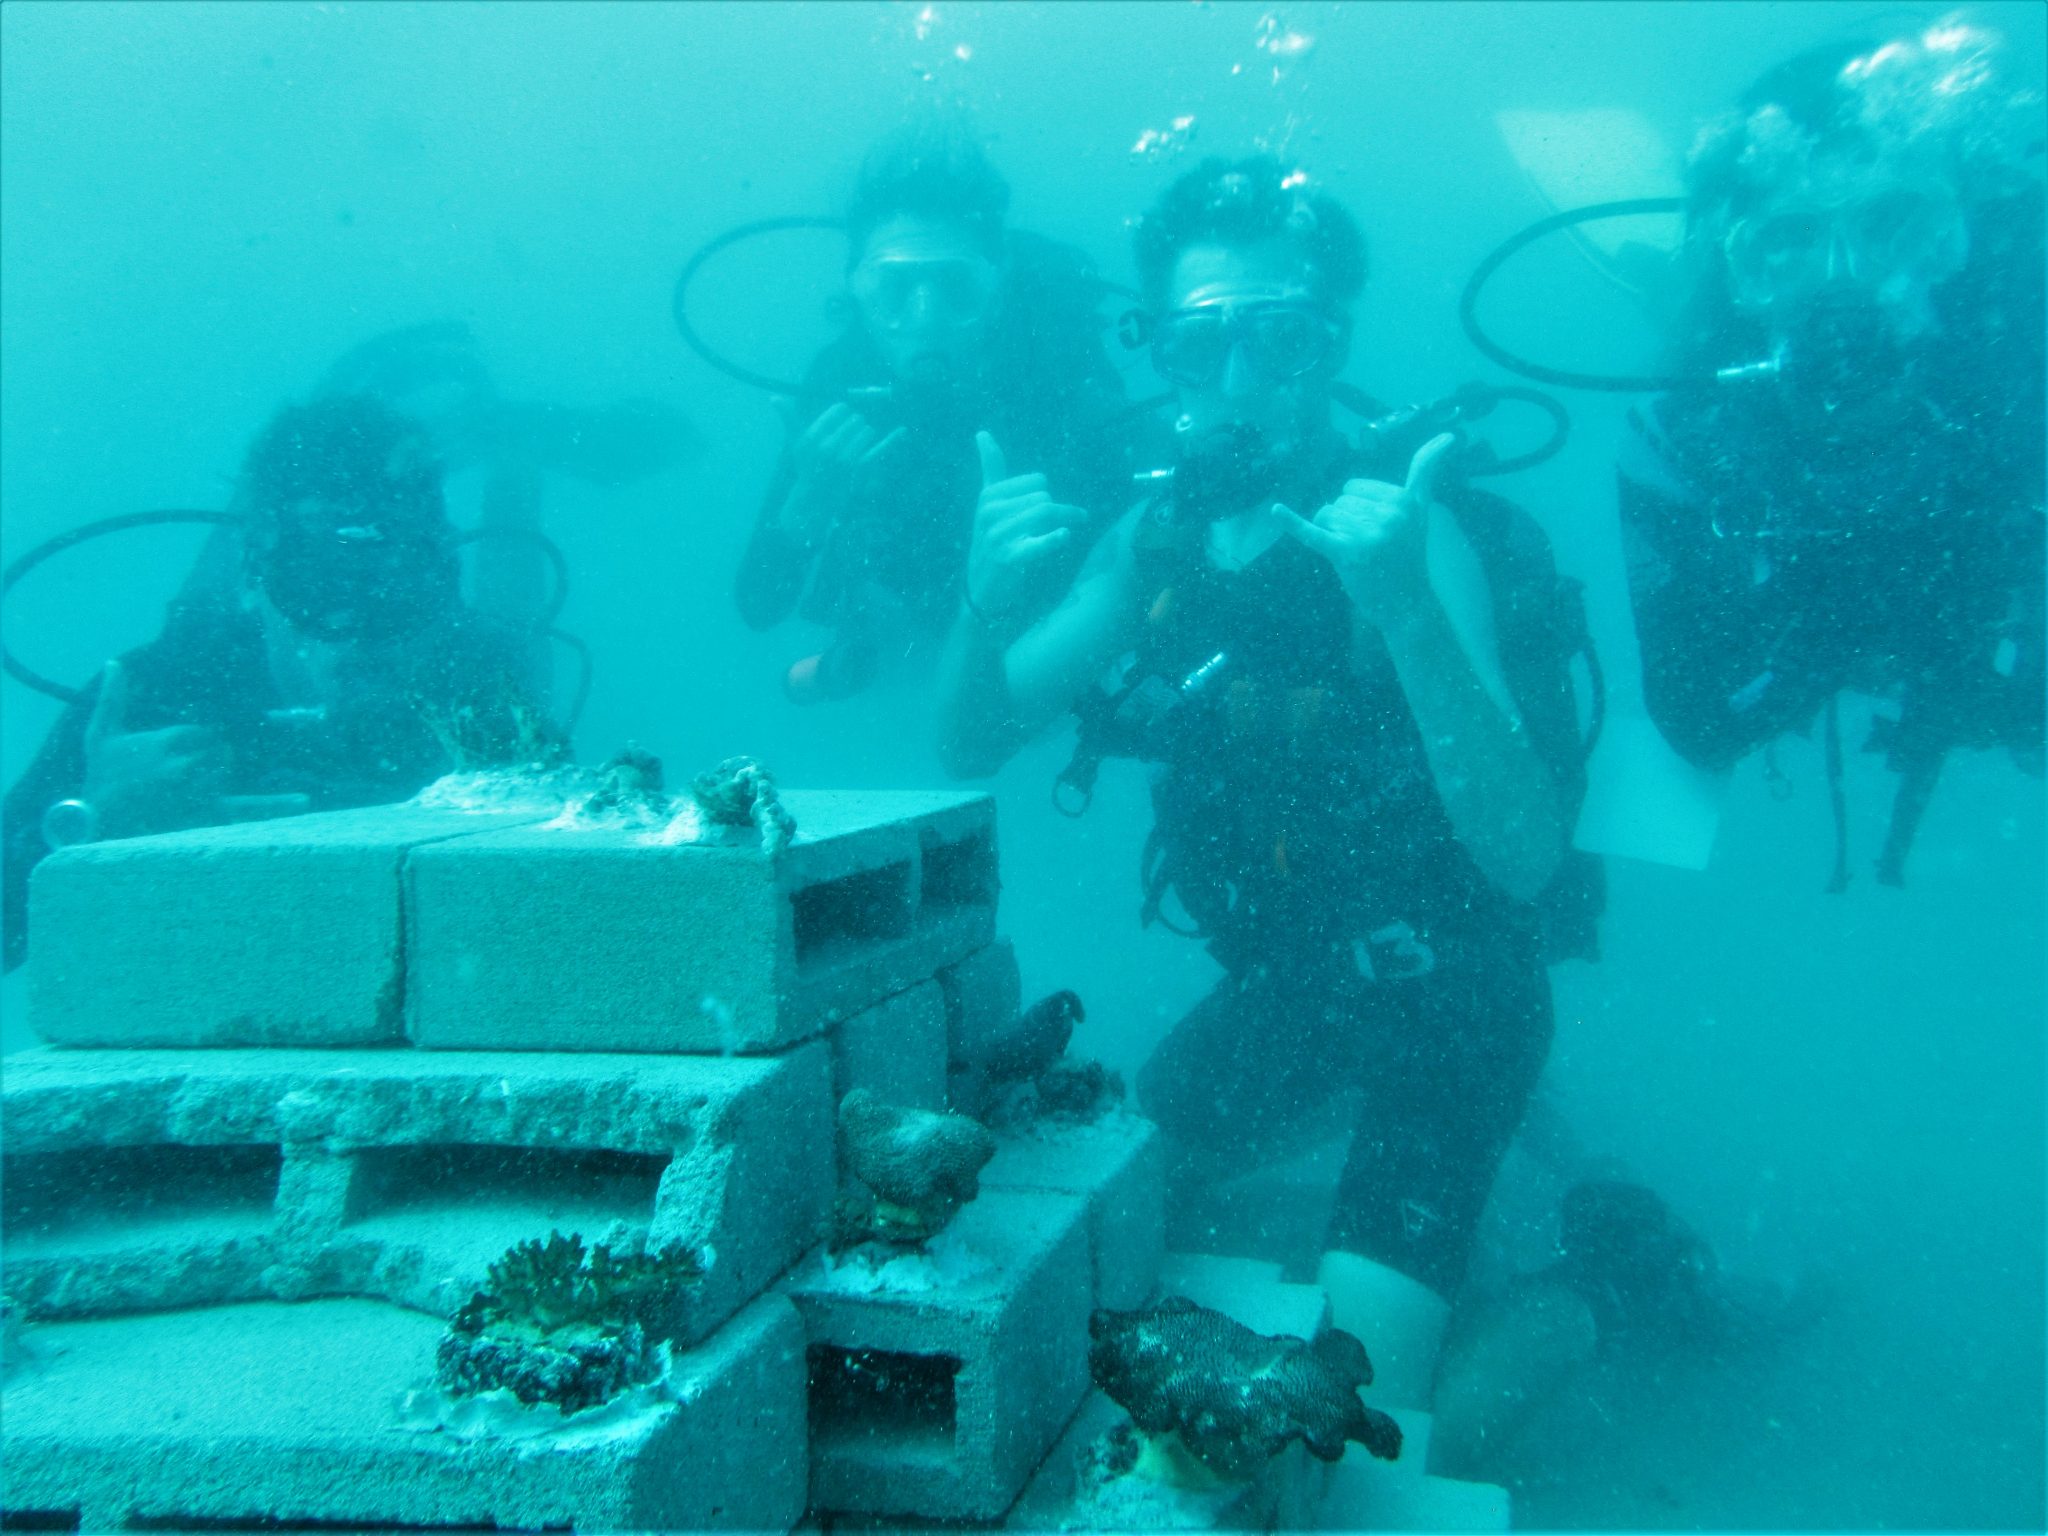 Artificial Reef built by Volunteers - Madagascar Research & Conservation